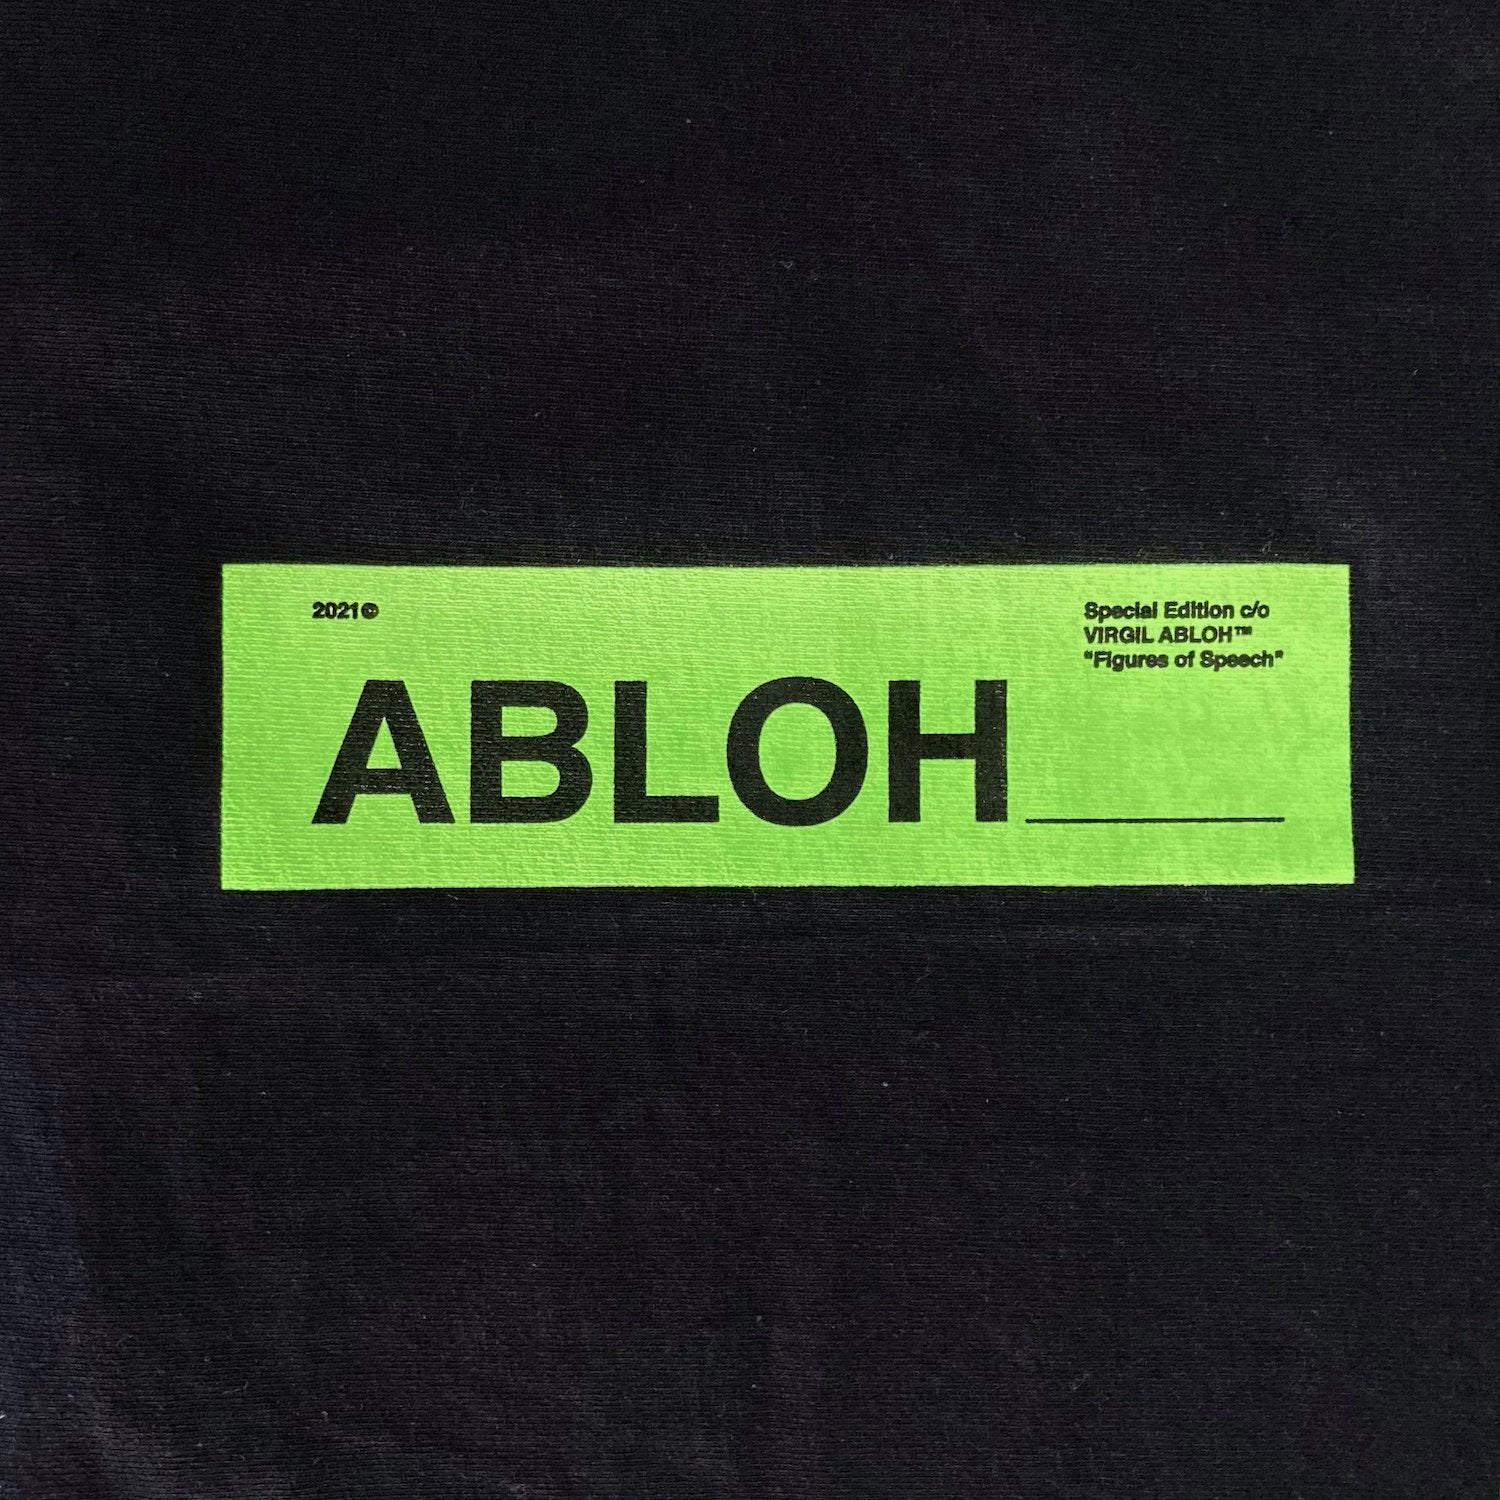 Louis Vuitton Virgil Abloh tee shirt, Brand new with